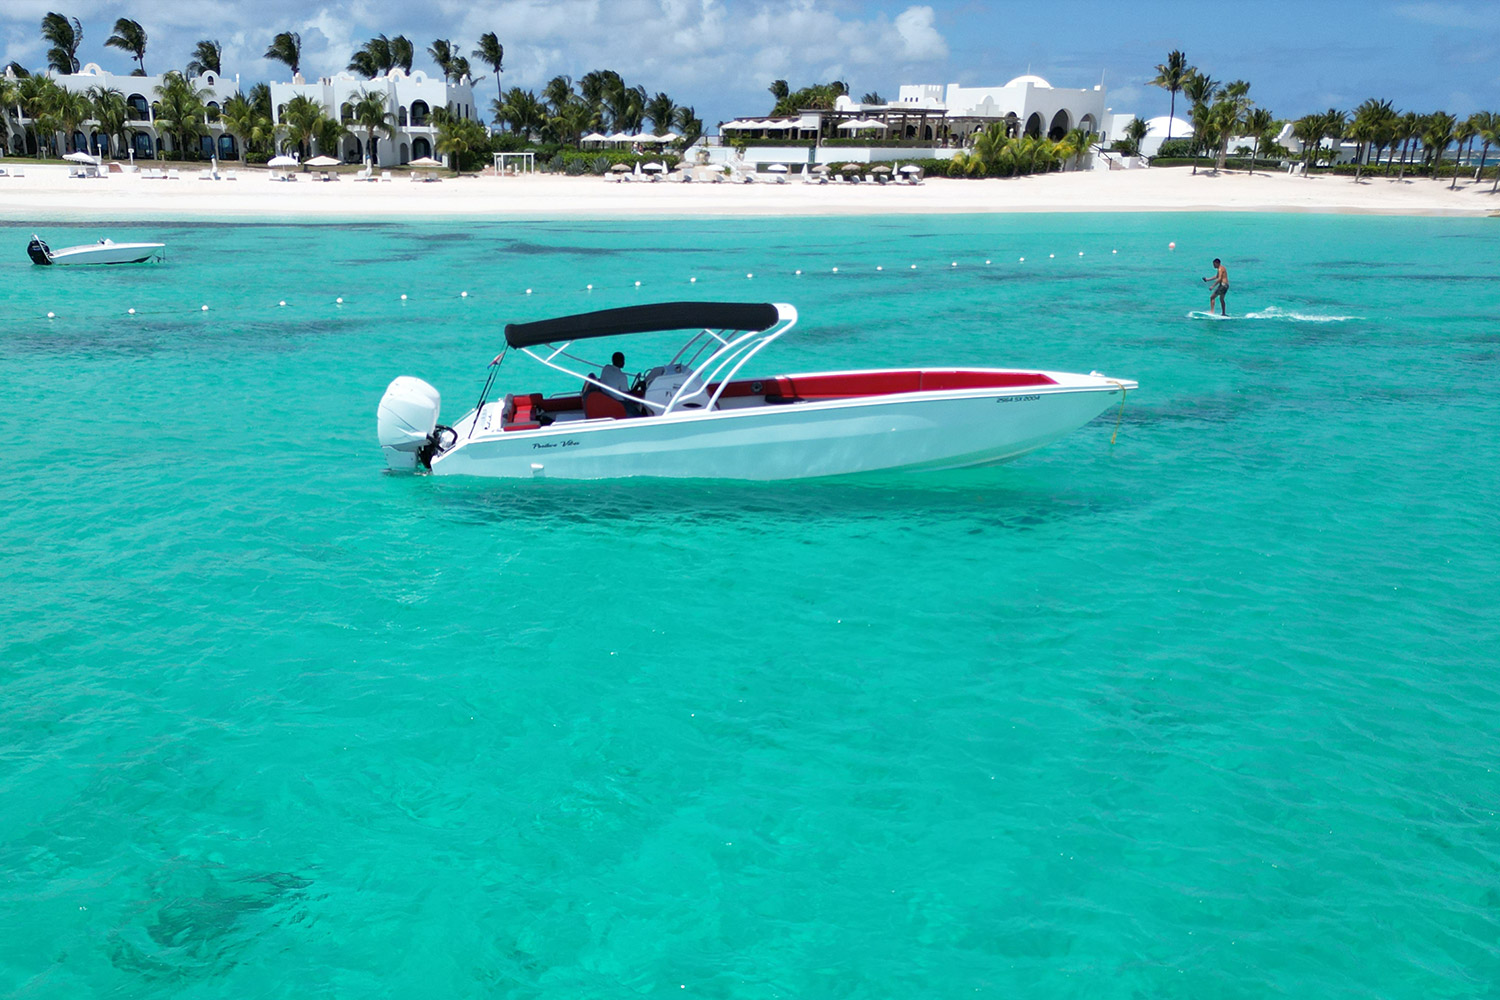 The Cigarette 36 is an elegantly designed yacht, with clean lines.